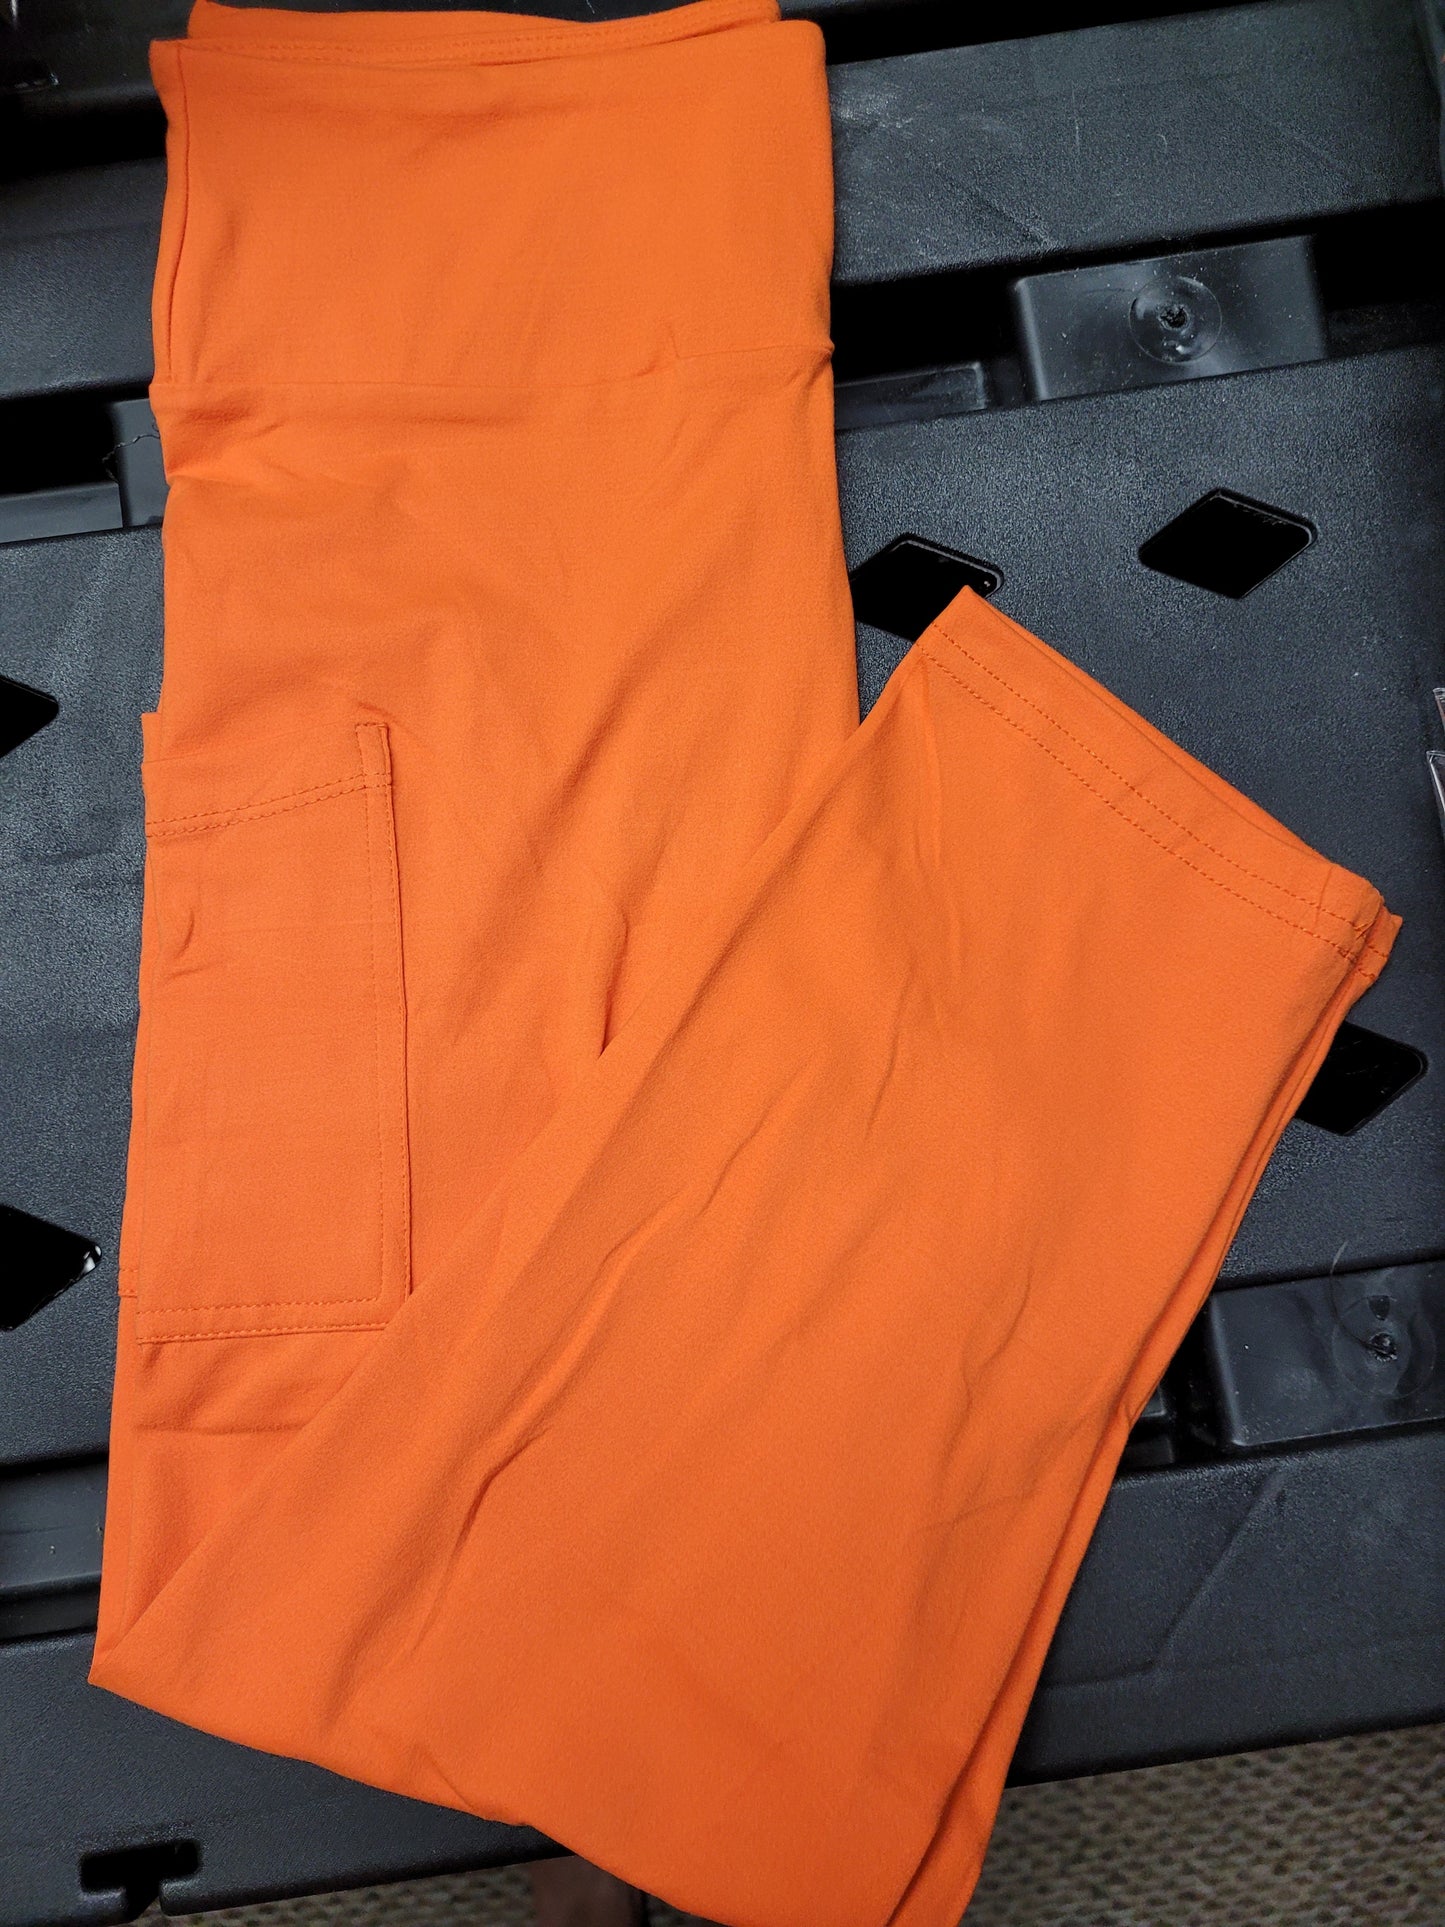 Orange capris and shorts with pockets